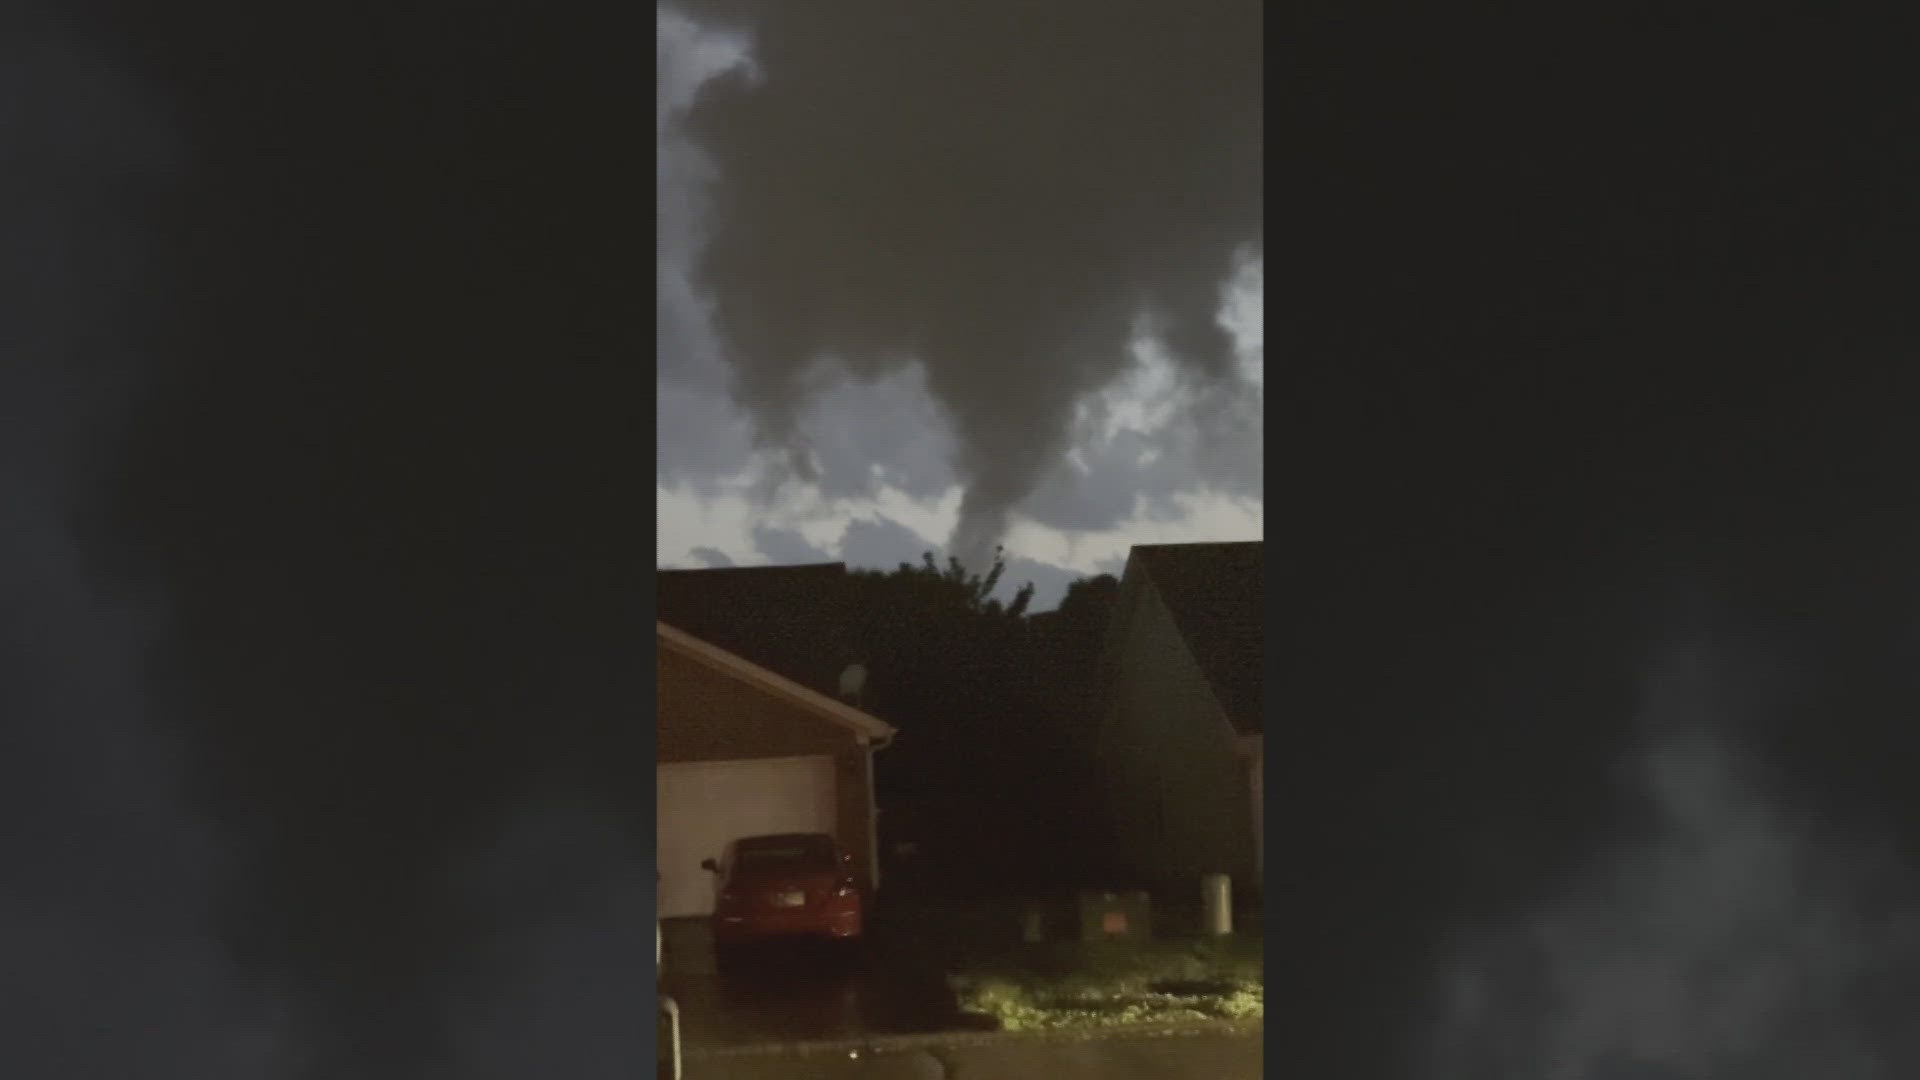 A possible tornado took shape in Perry Crossing, Indiana Tuesday night.